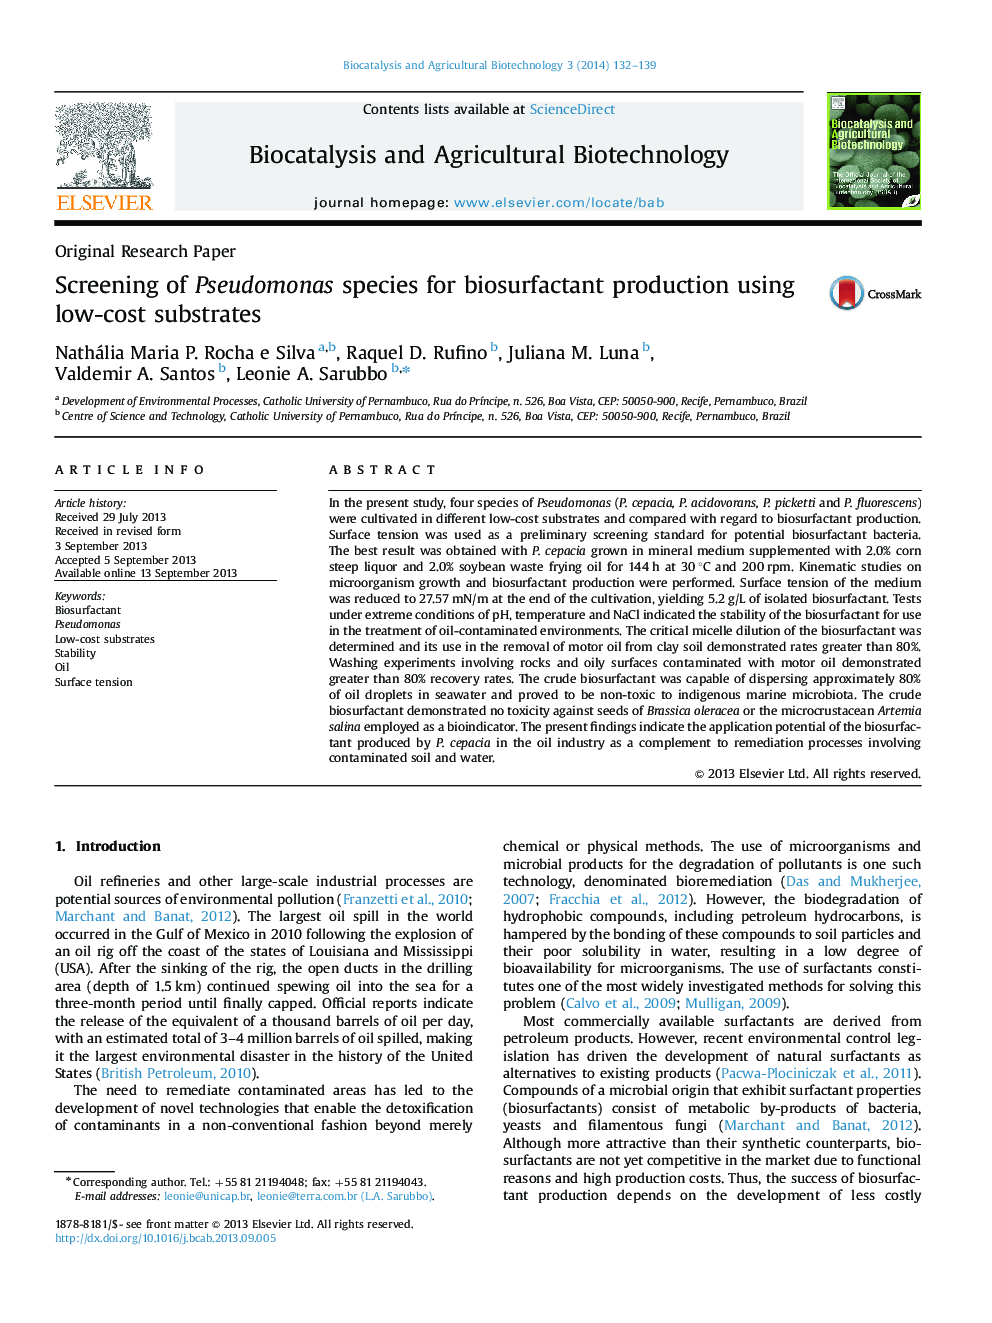 Screening of Pseudomonas species for biosurfactant production using low-cost substrates